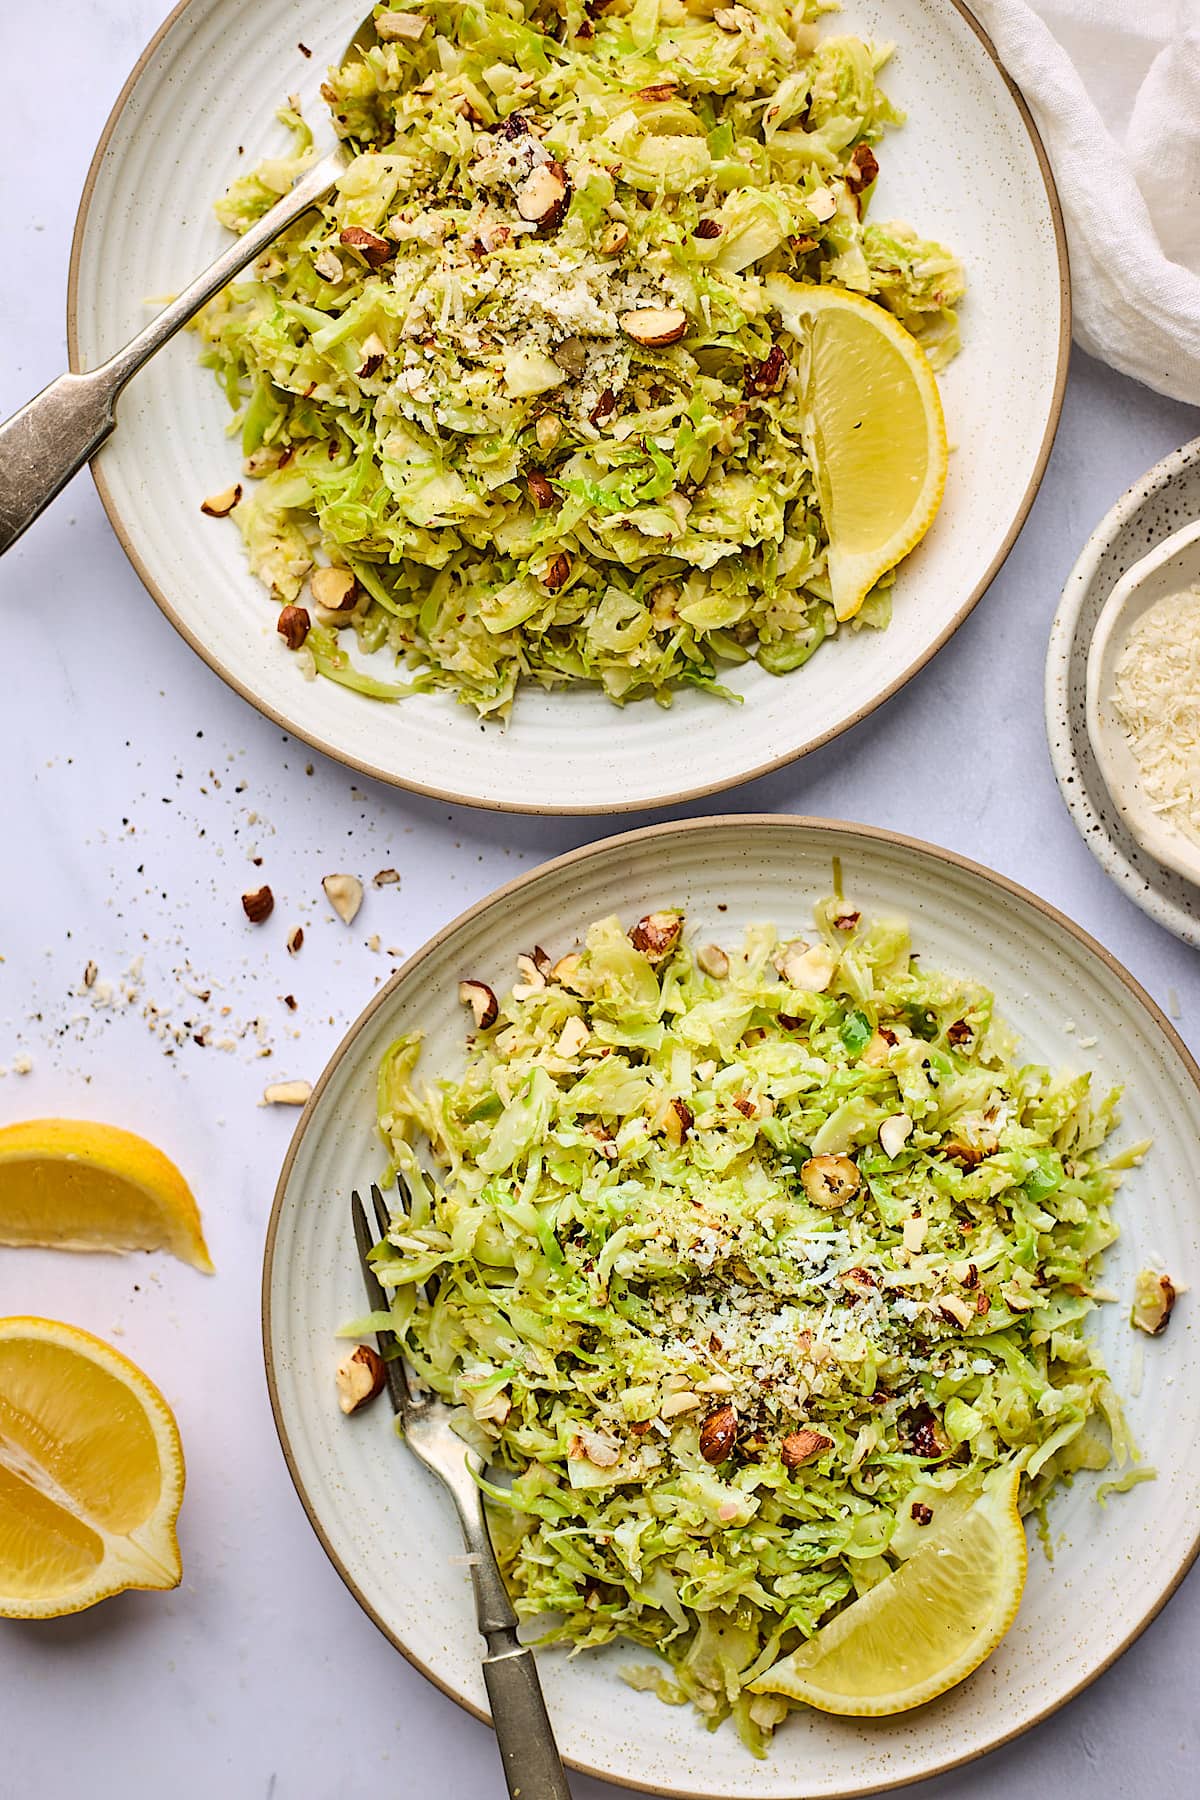 sautéed shredded Brussels sprouts with Parmesan cheese and hazelnuts on plates with forks and lemon wedges.